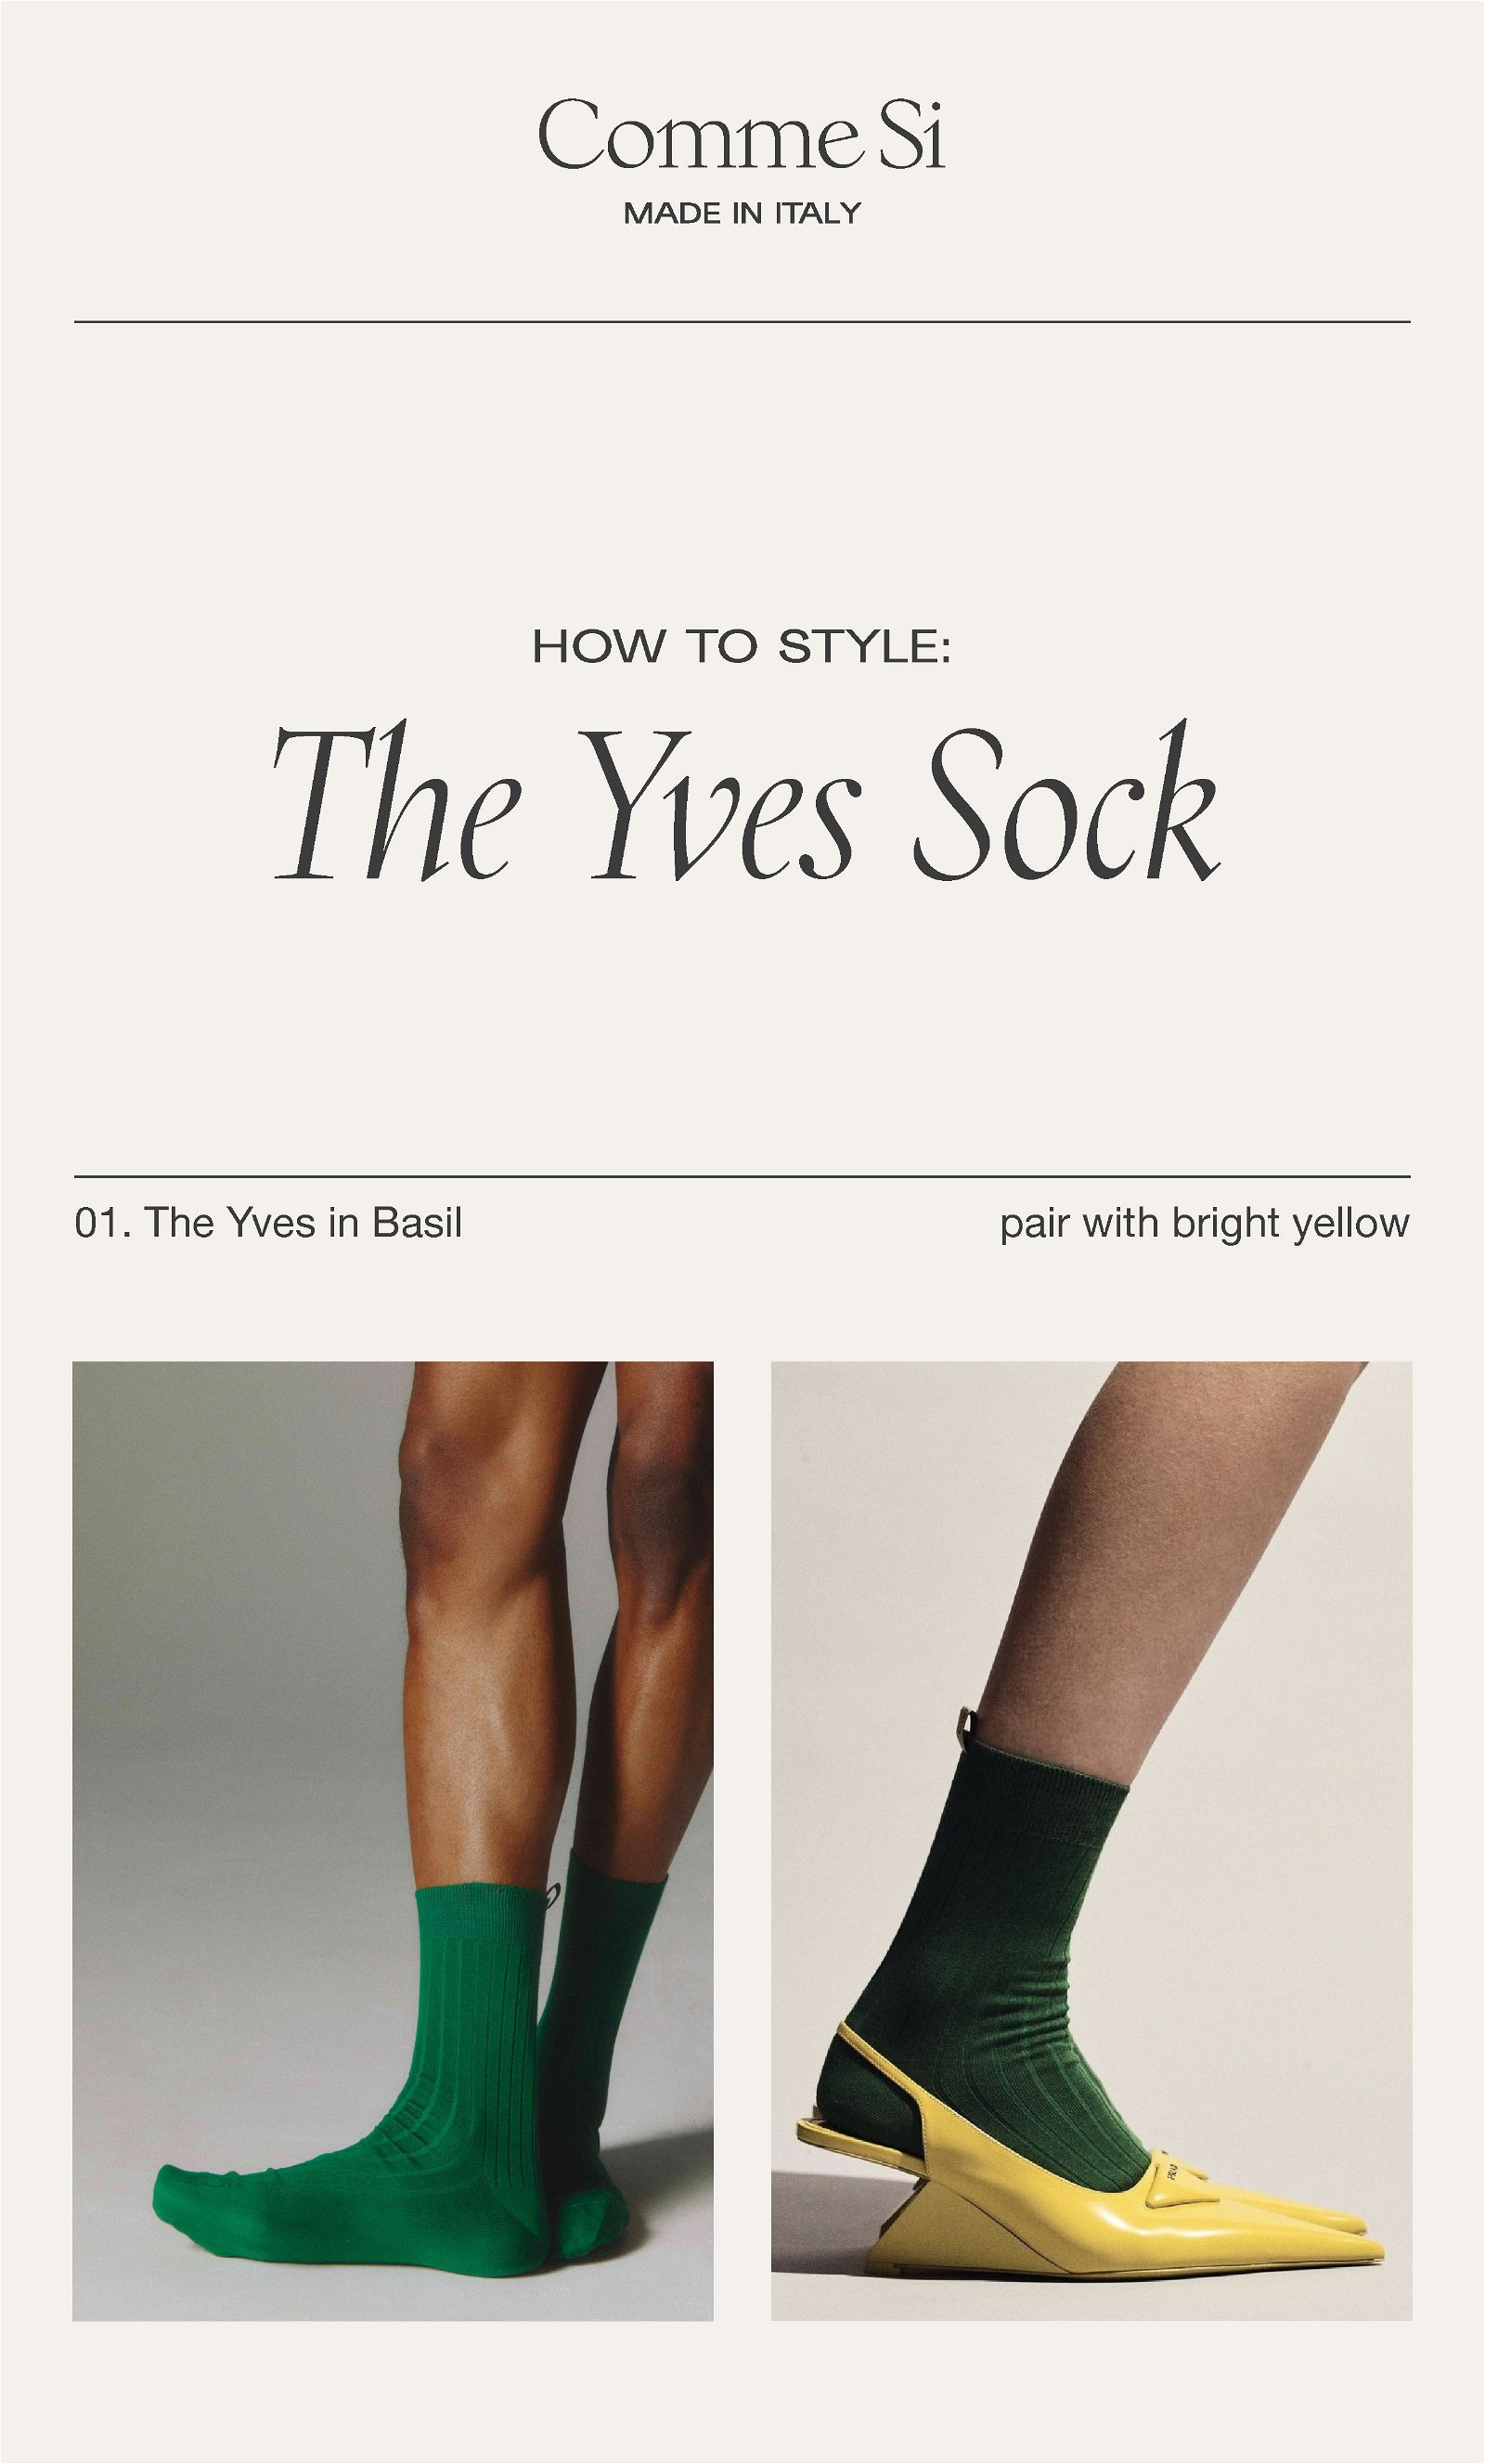 How to Style: The Yves Sock. 01. The Yves in Basil. Pair with bright yellow